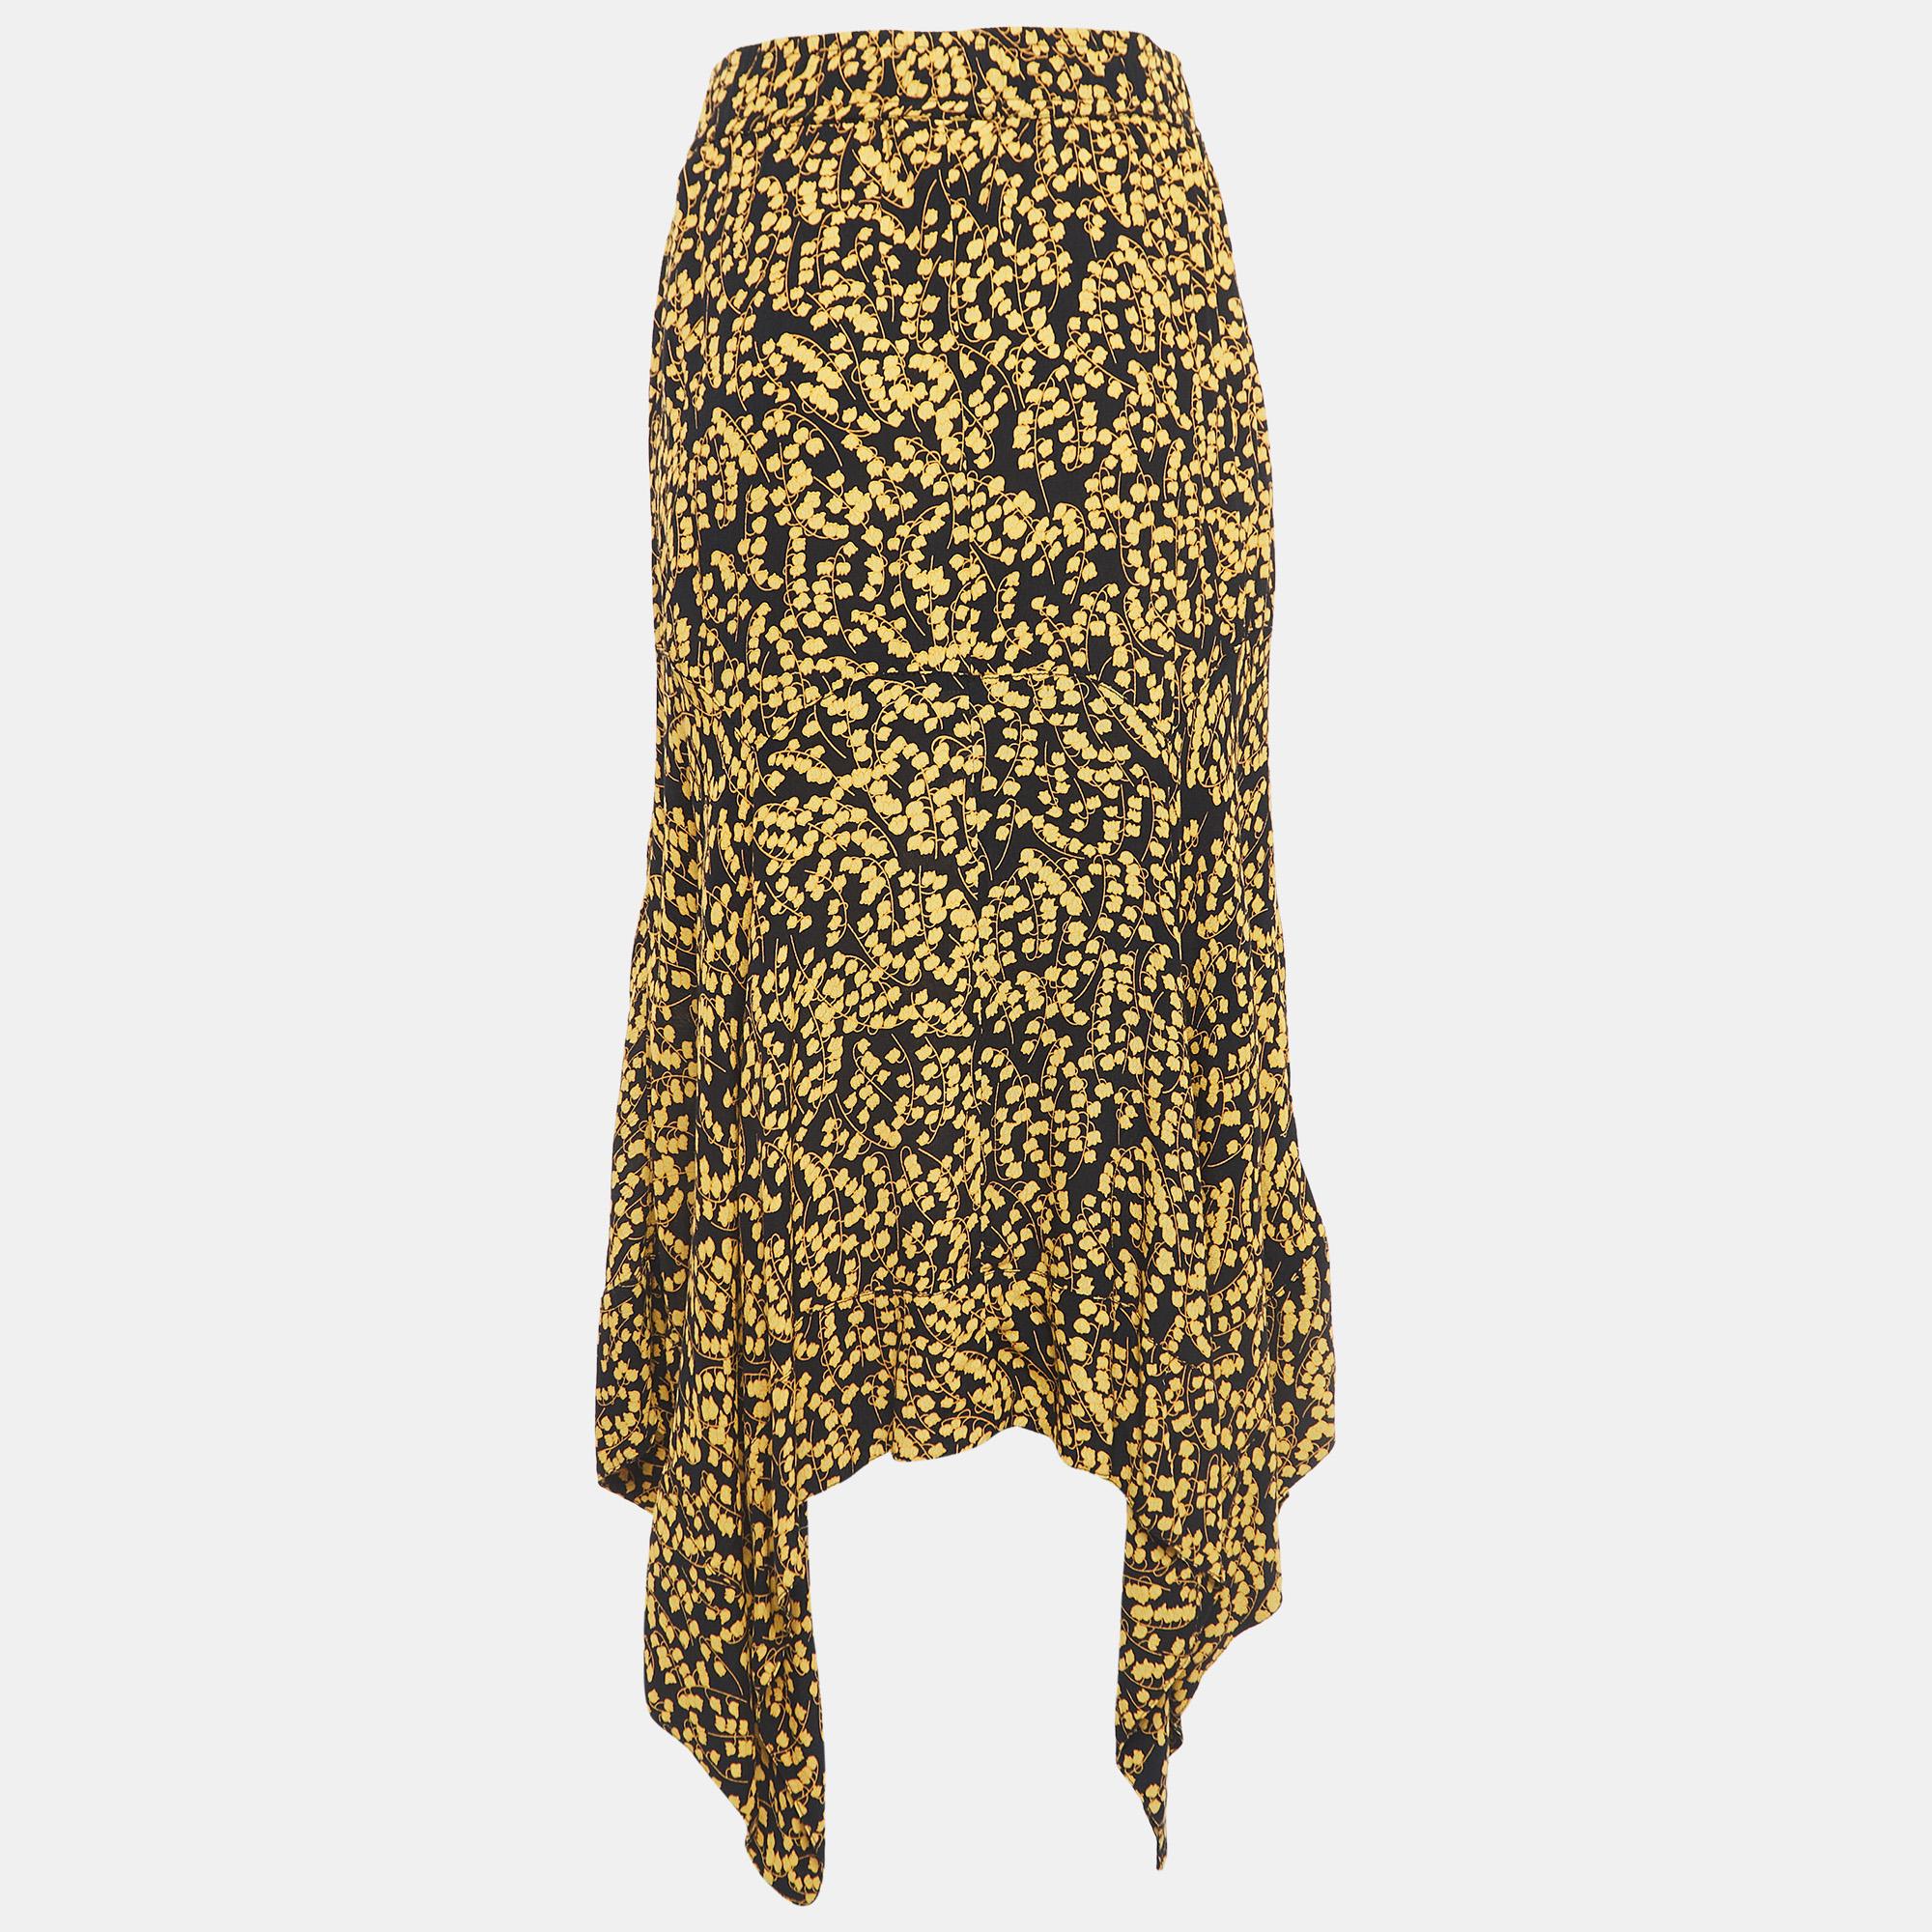 The Ganni skirt exudes effortless chic with its vibrant floral pattern. Crafted from high-quality crepe fabric, the skirt boasts an asymmetrical silhouette that adds a playful edge to any ensemble. Elevate your style with this versatile and